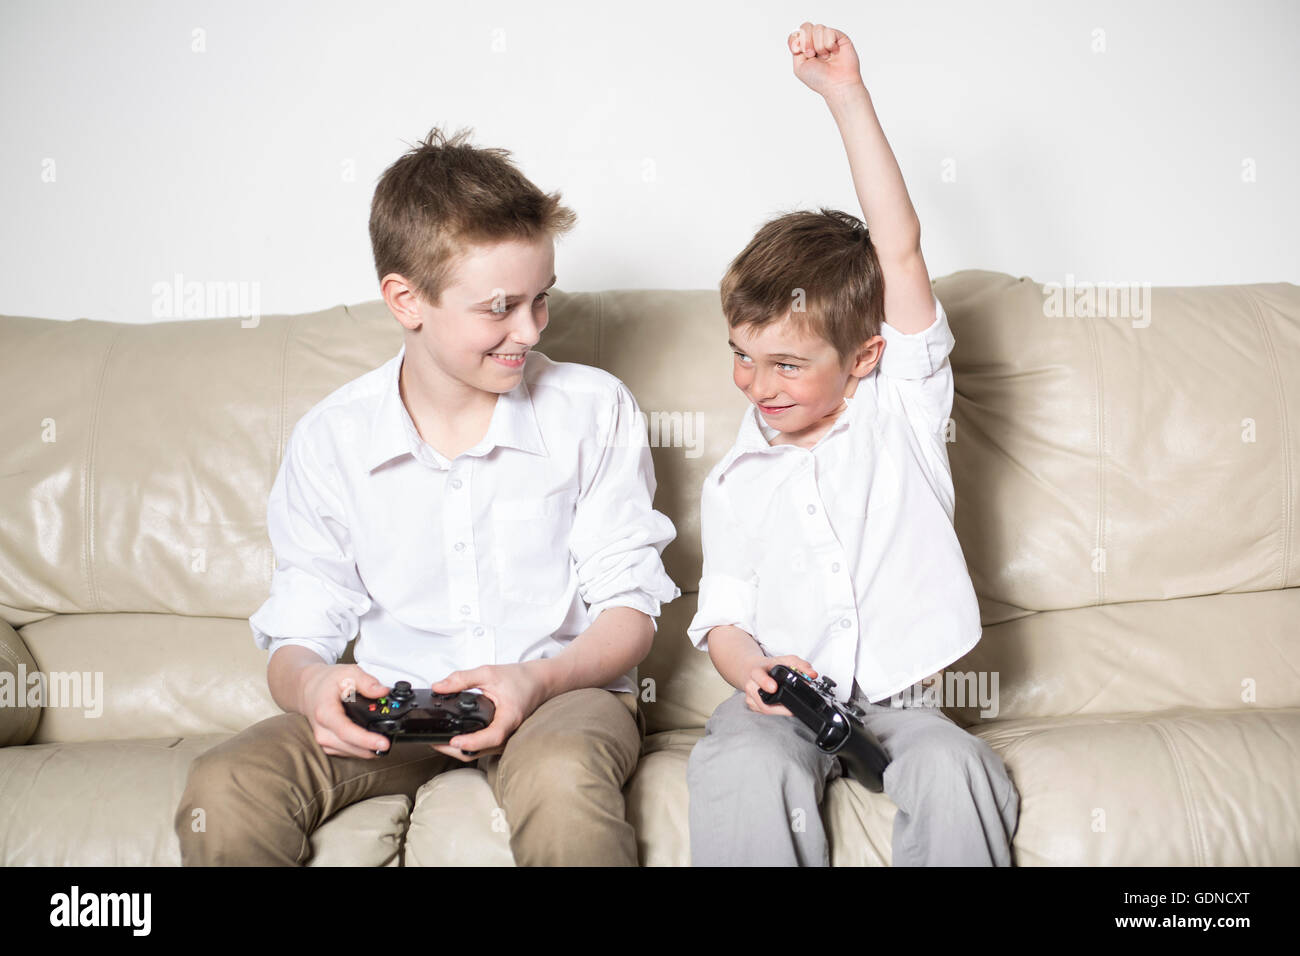 boys having lots of fun with video games Stock Photo